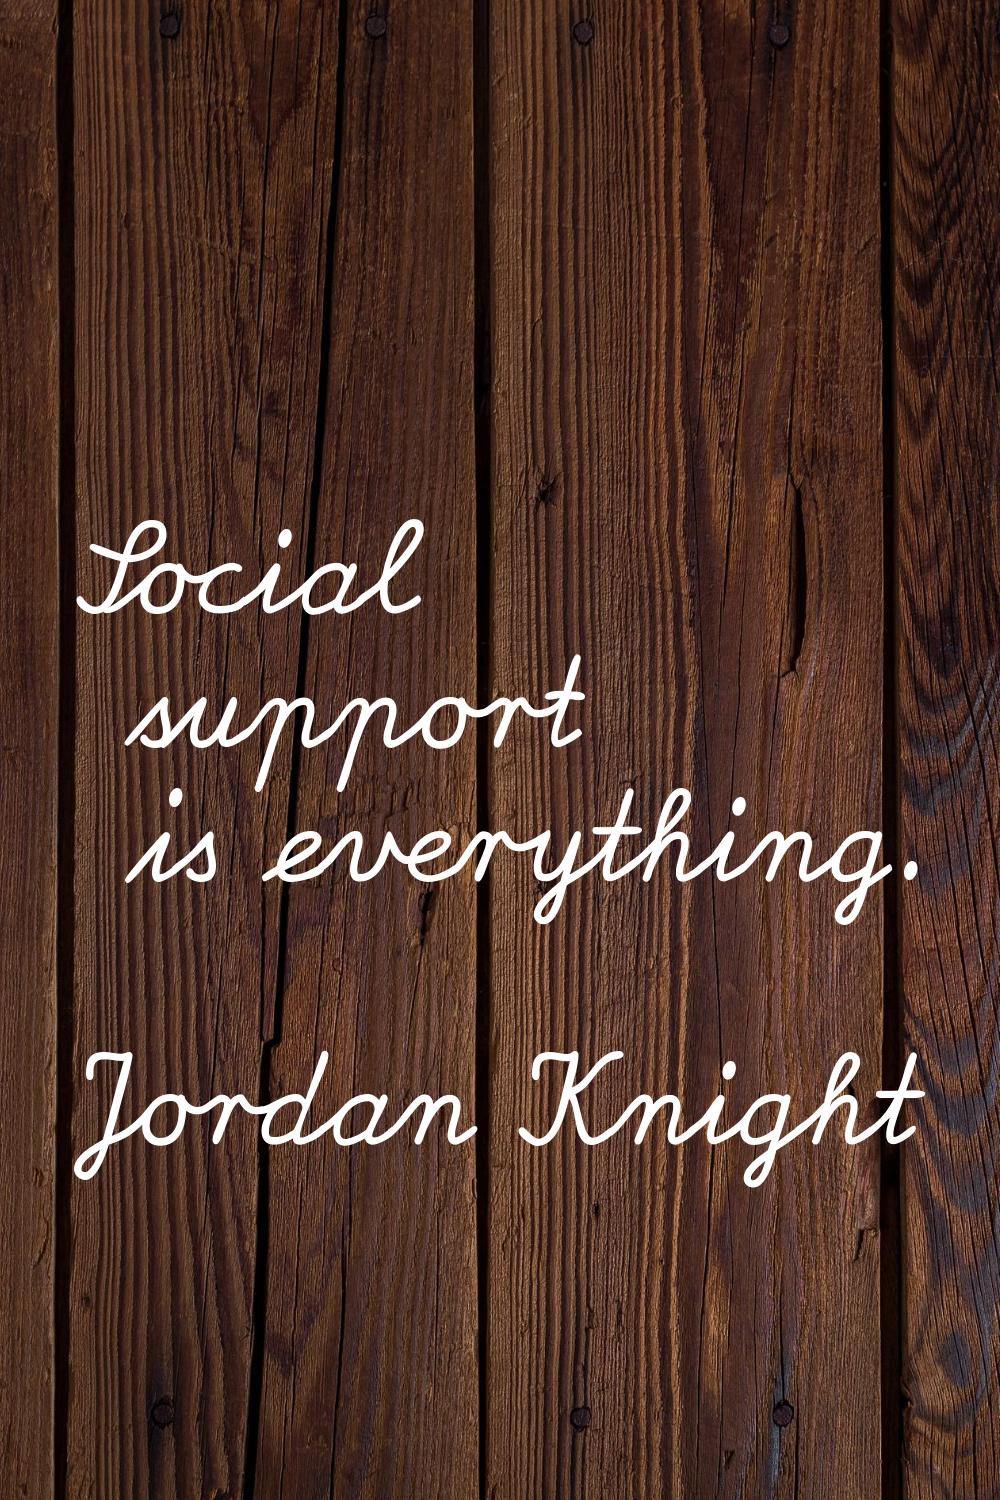 Social support is everything.